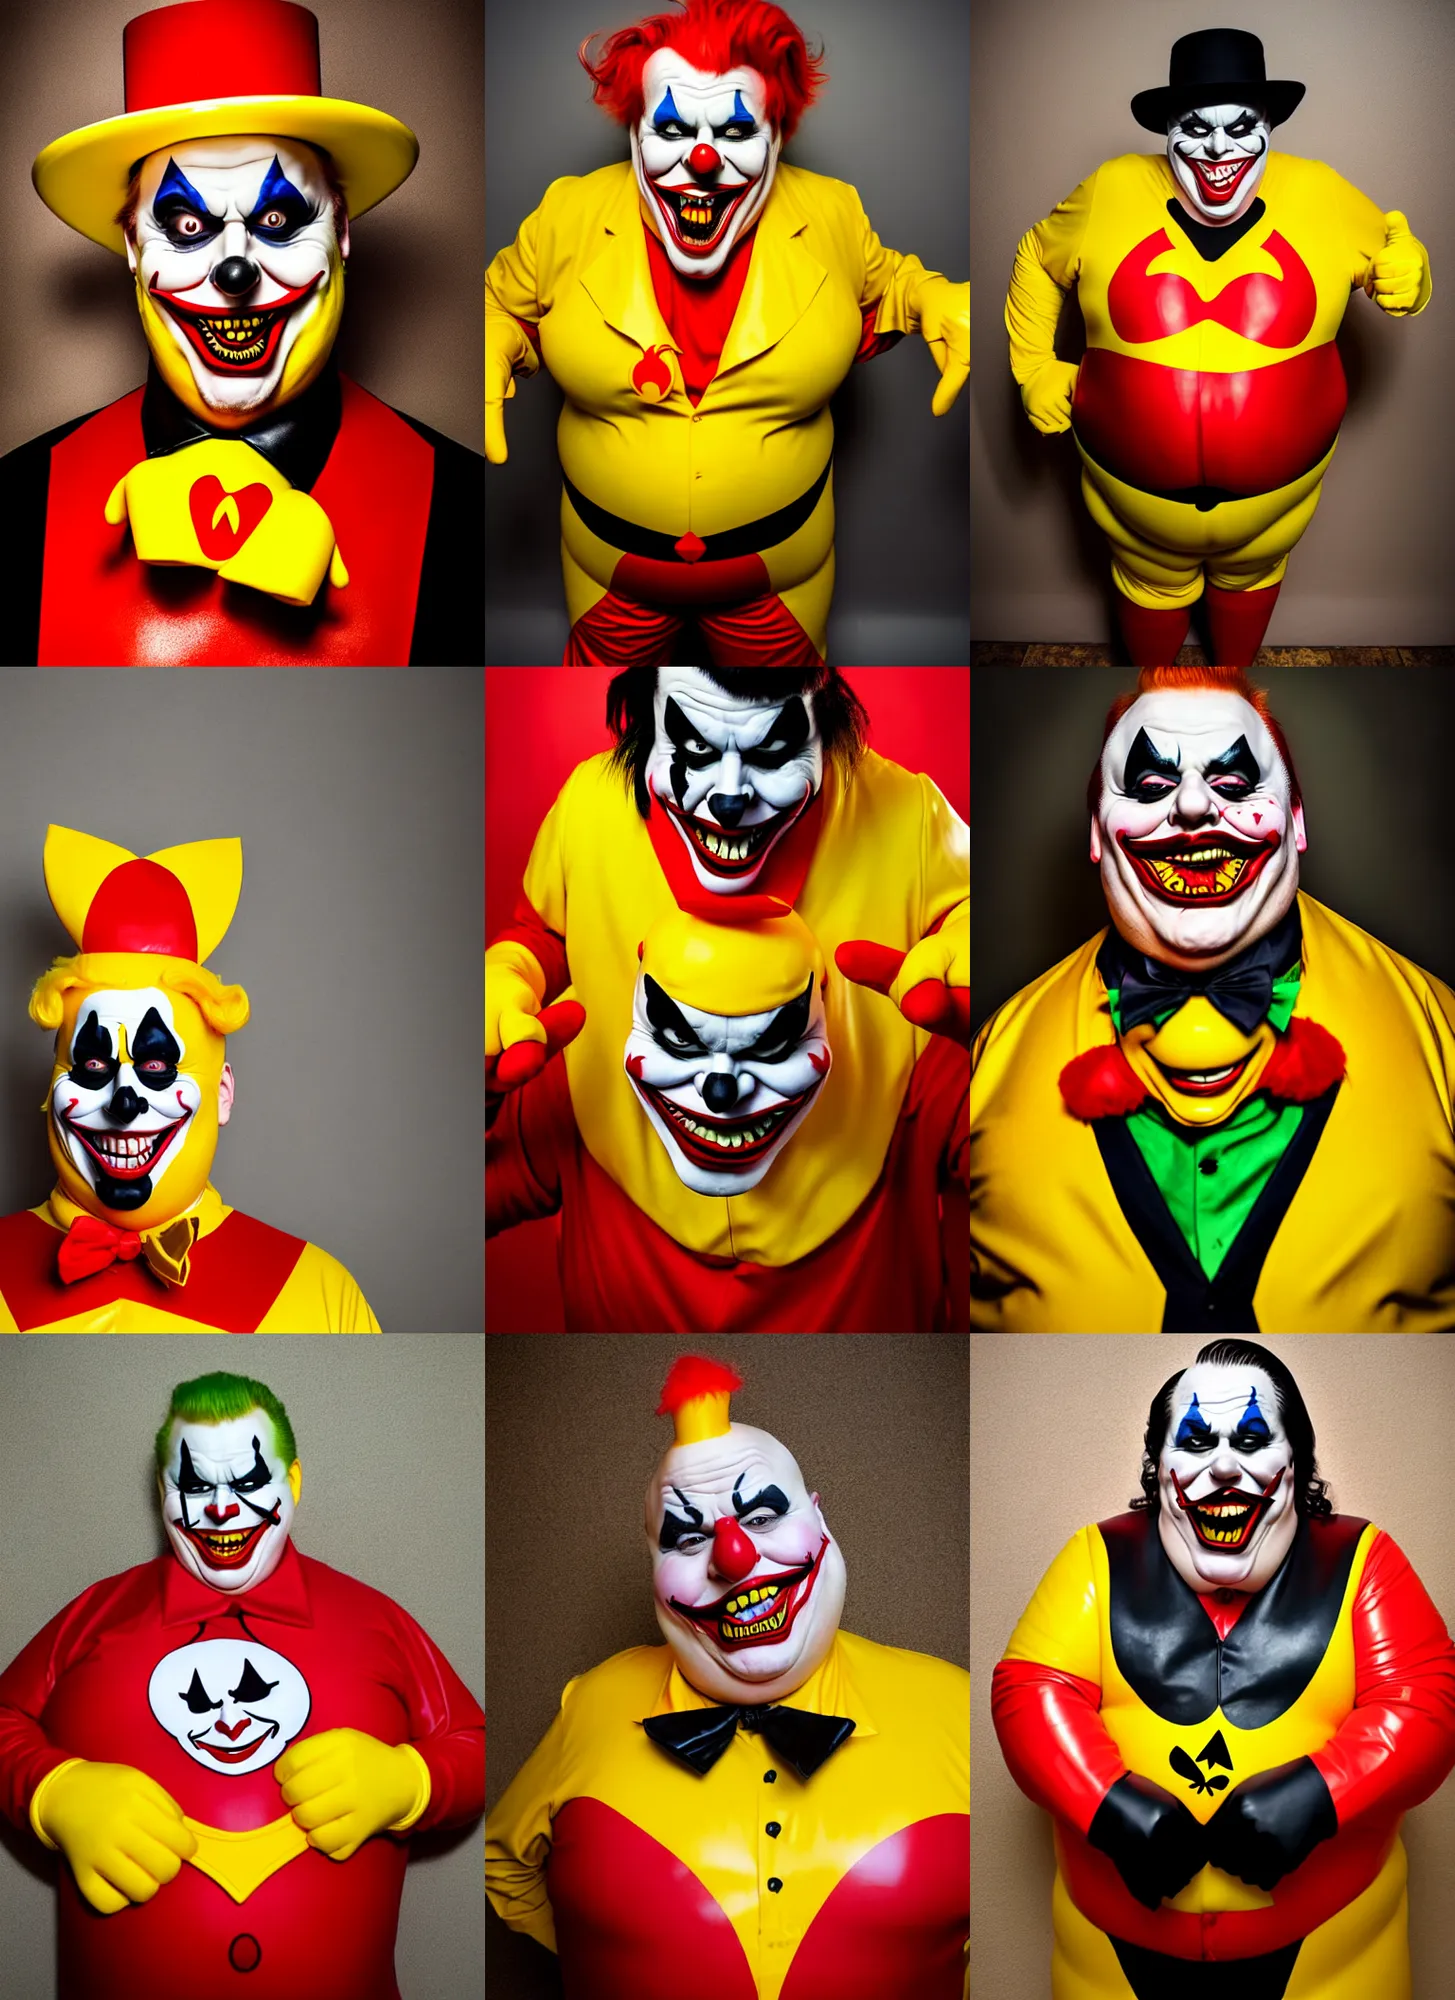 Prompt: wide angle lens portrait of a very fat sinister looking joker dressed in yellow and red rubber latex Ronald Macdonalds costume, red hair, a Macdonalds logo on his chest, art by Oleg Vdovenko